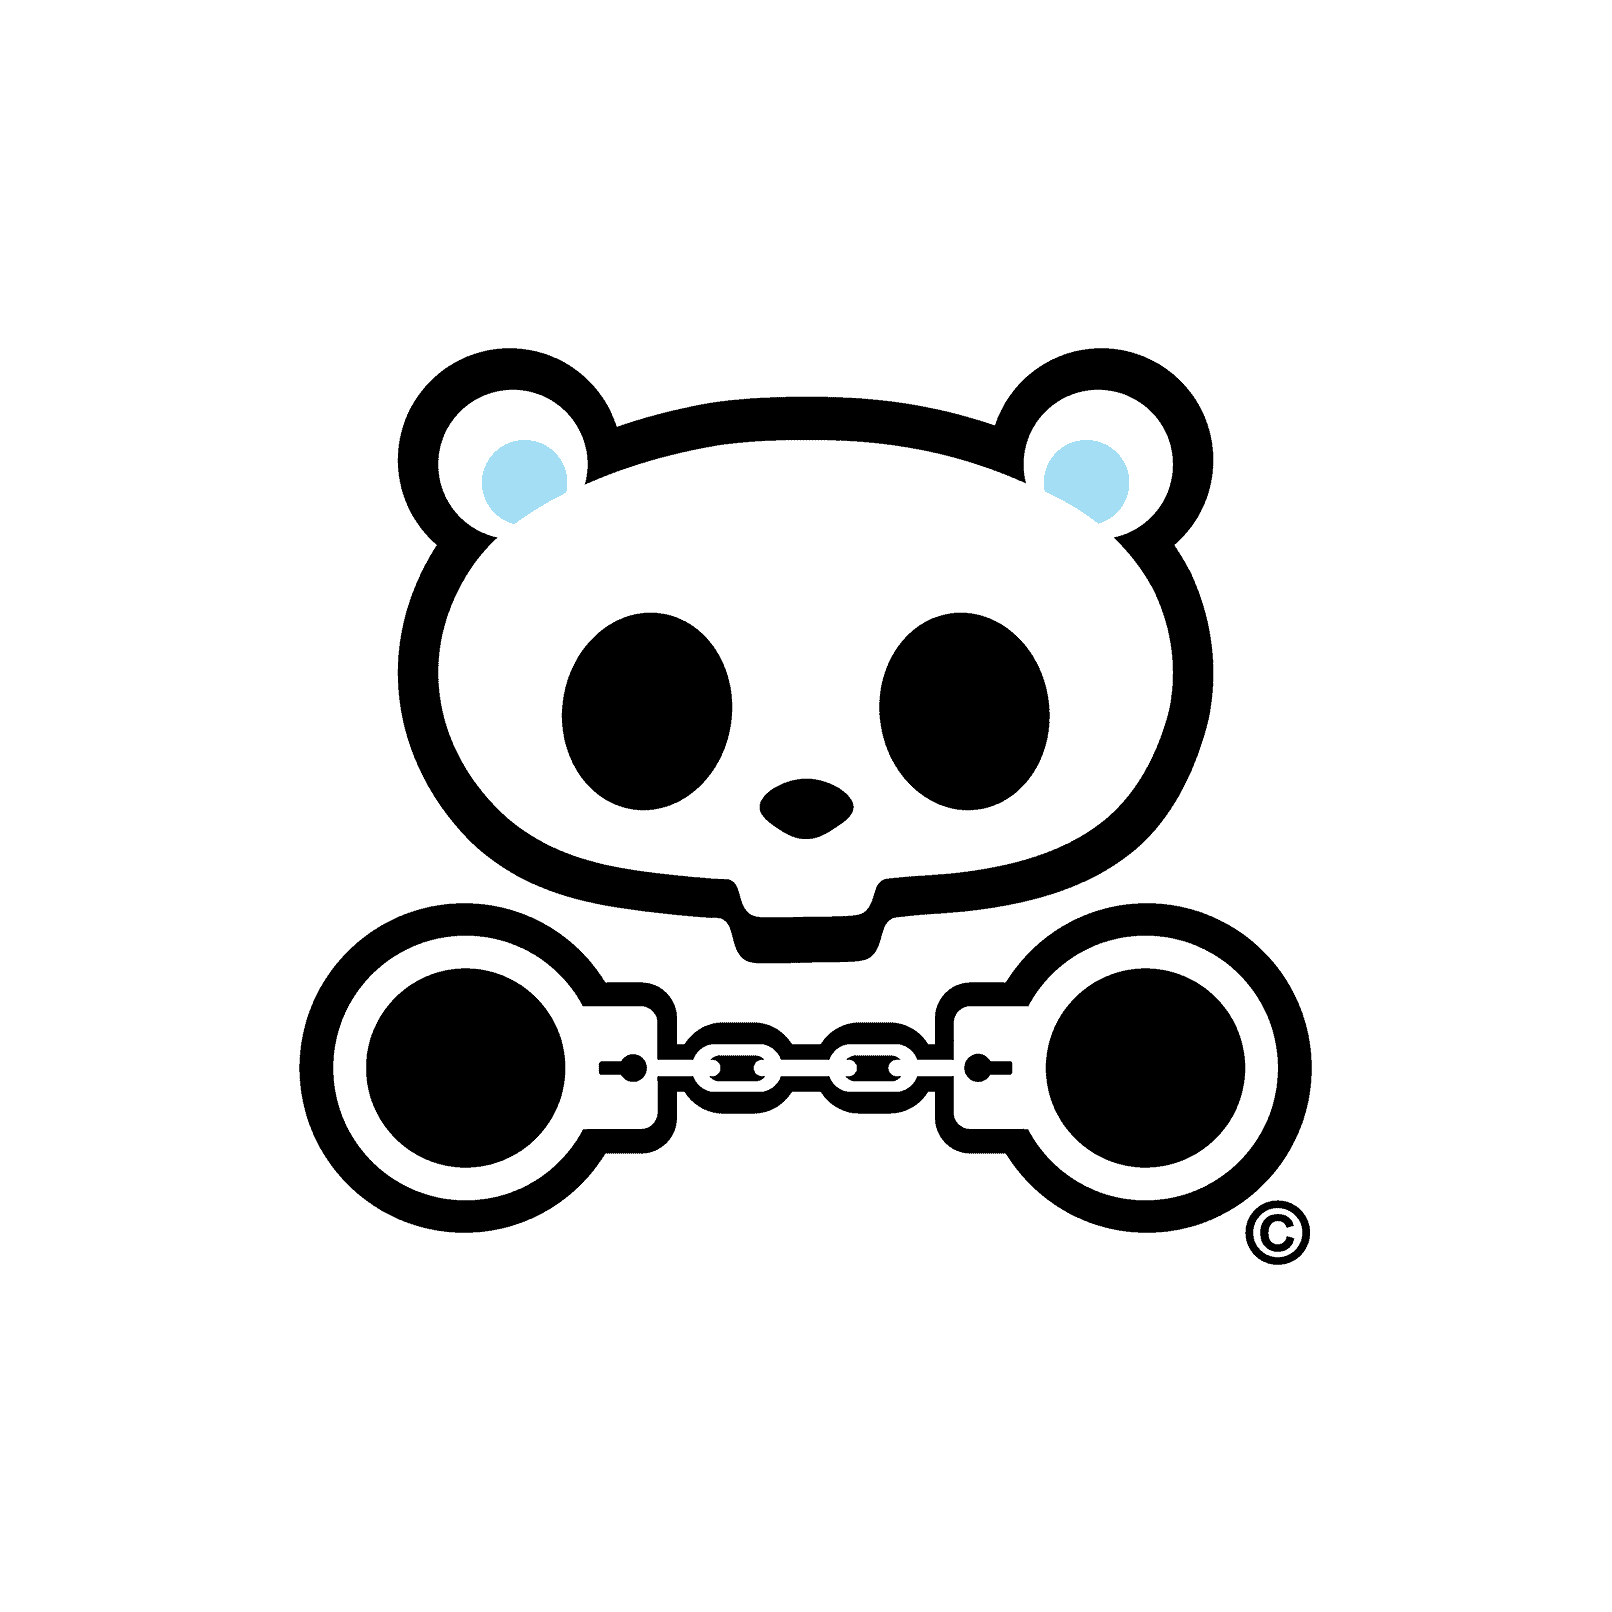 List Of Clothing Brands With Teddy Bear Logos